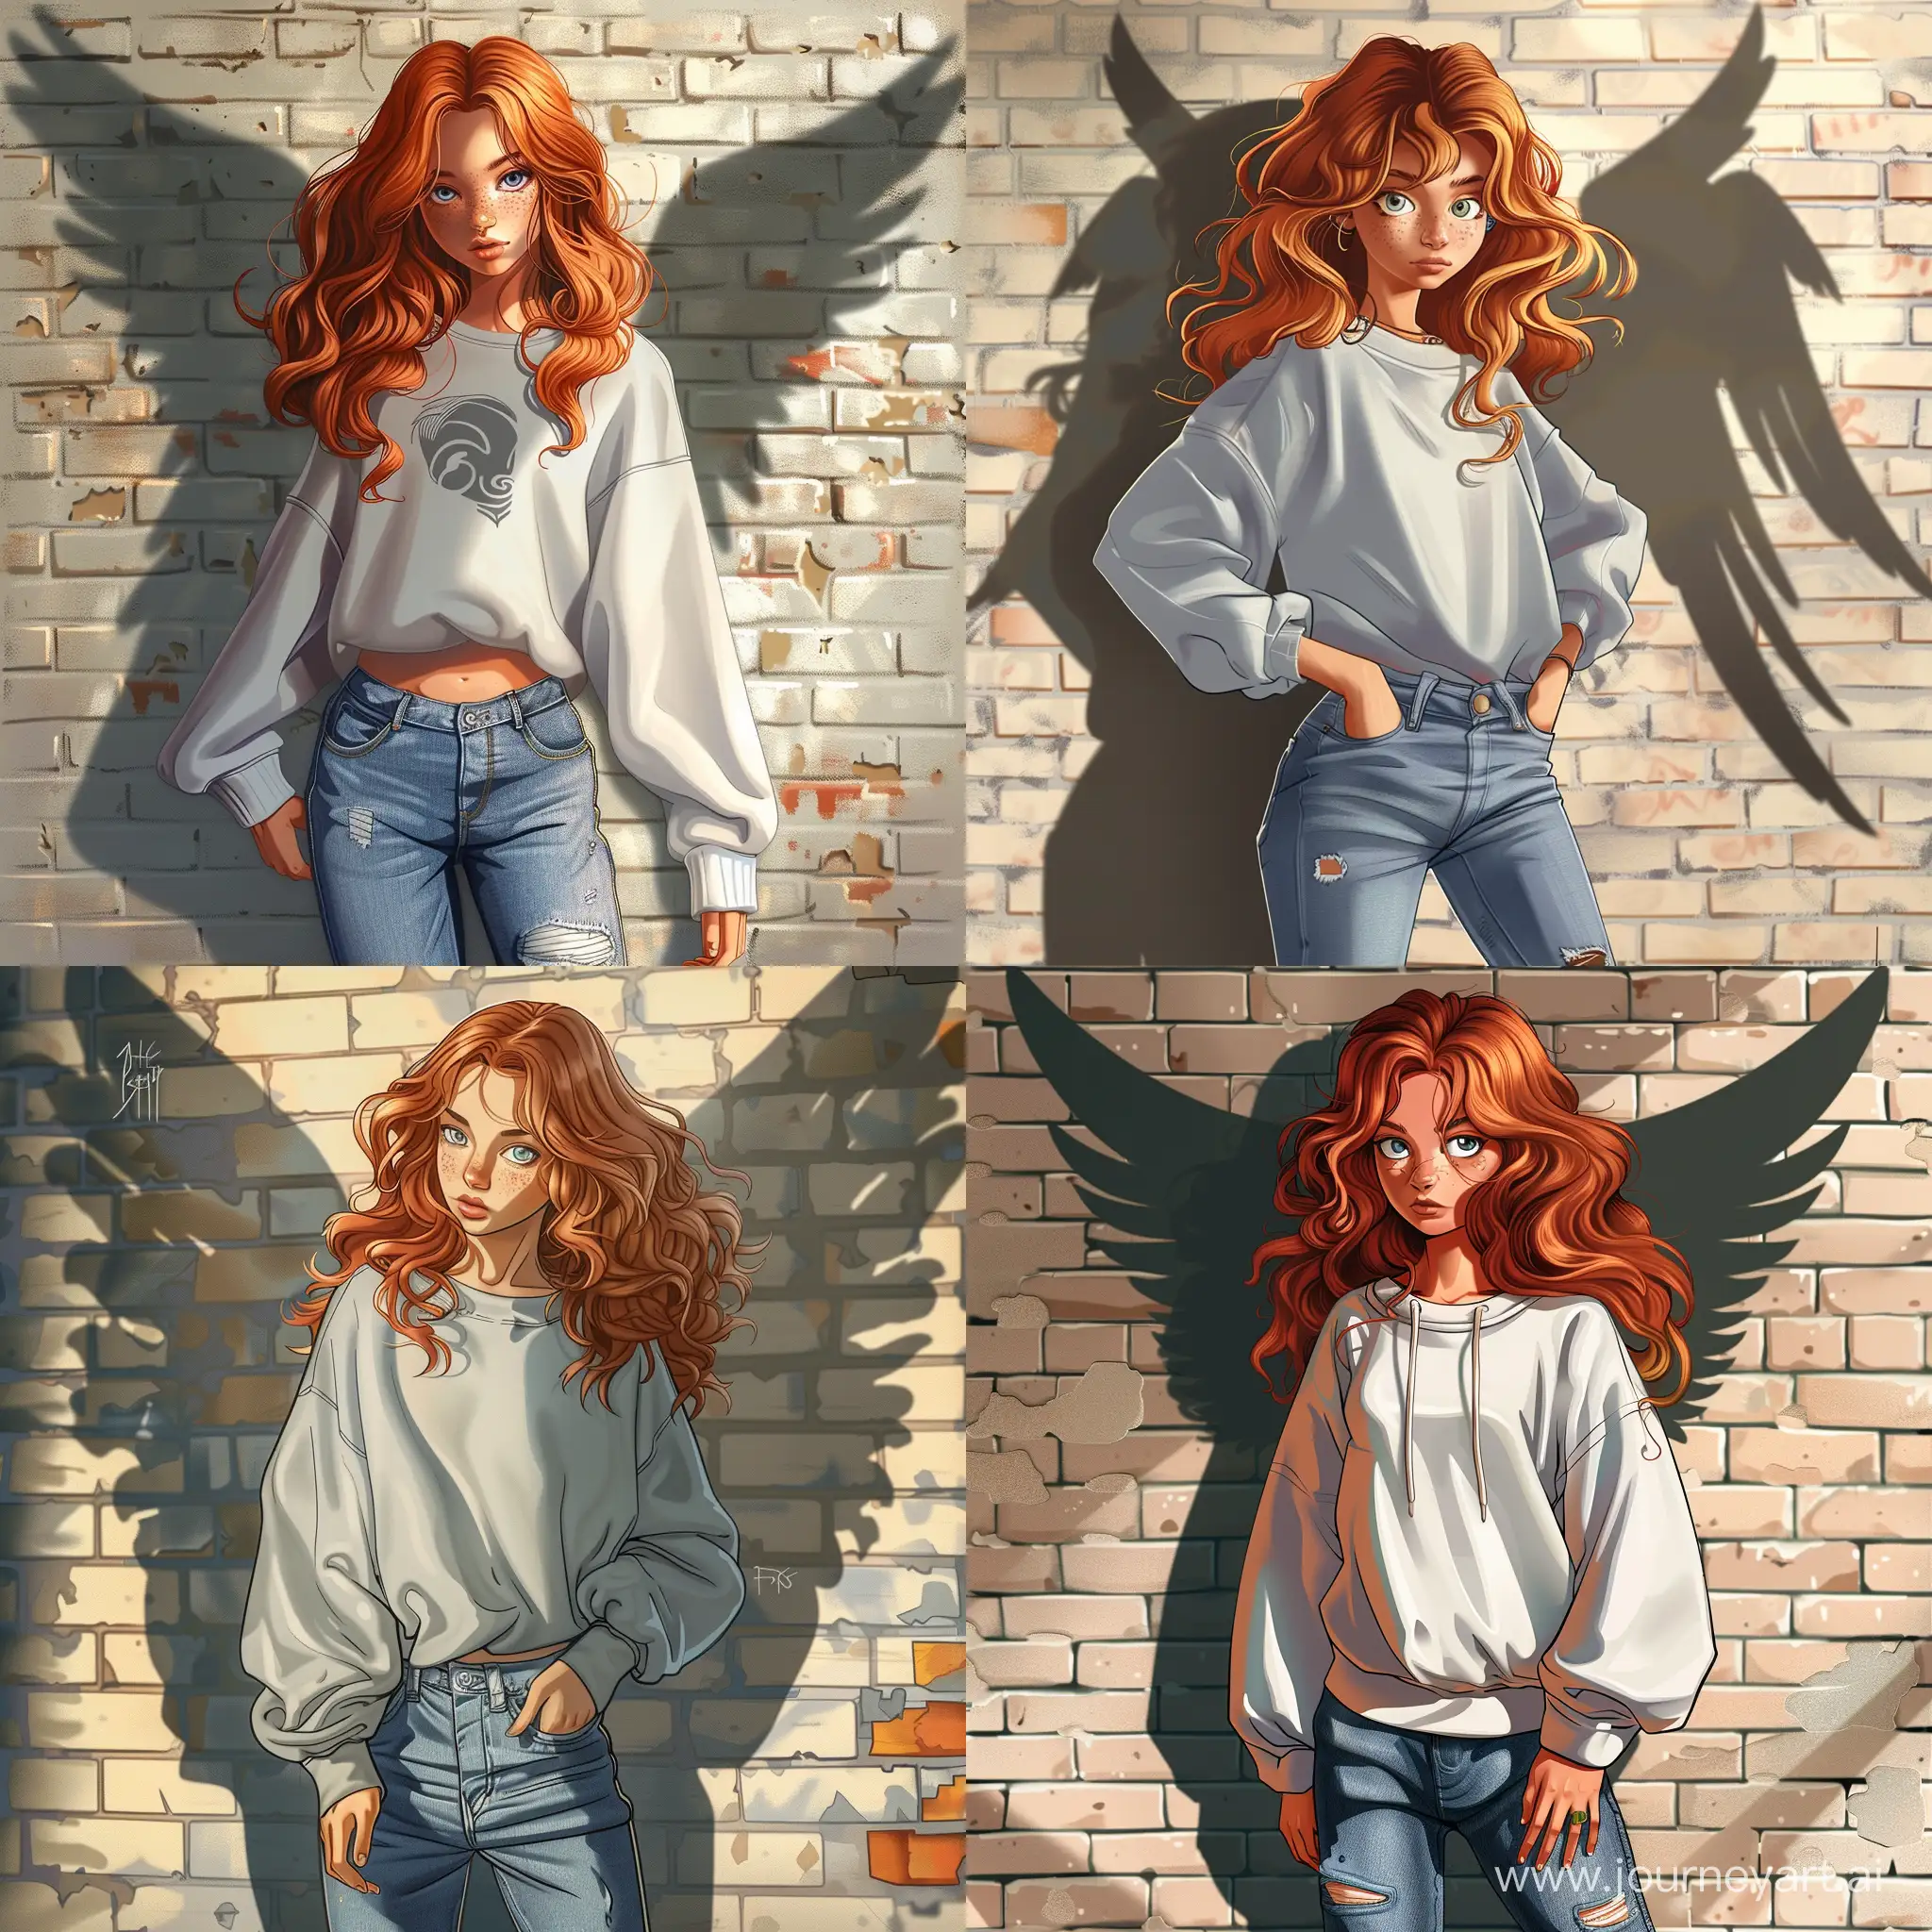 Beautiful girl, wavy red hair, gray eyes, white skin, teenager, 14 years old, jeans and oversize sweatshirt, shadow of wings on the brick wall behind, high quality, high detail, cartoon art